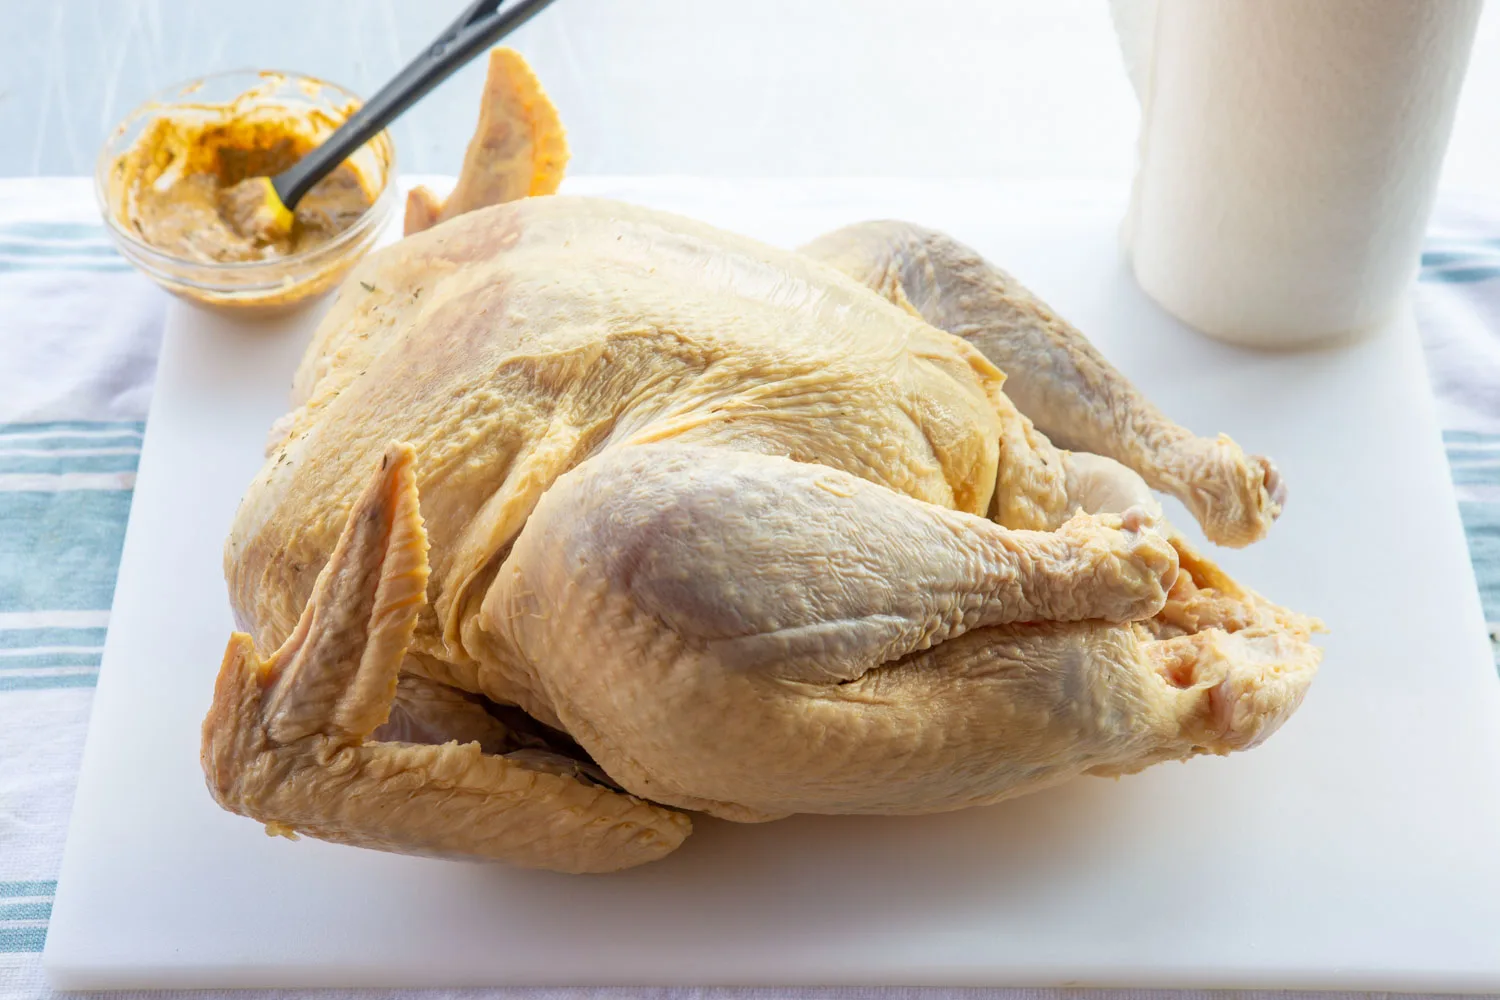 A brined turkey ready for compound butter